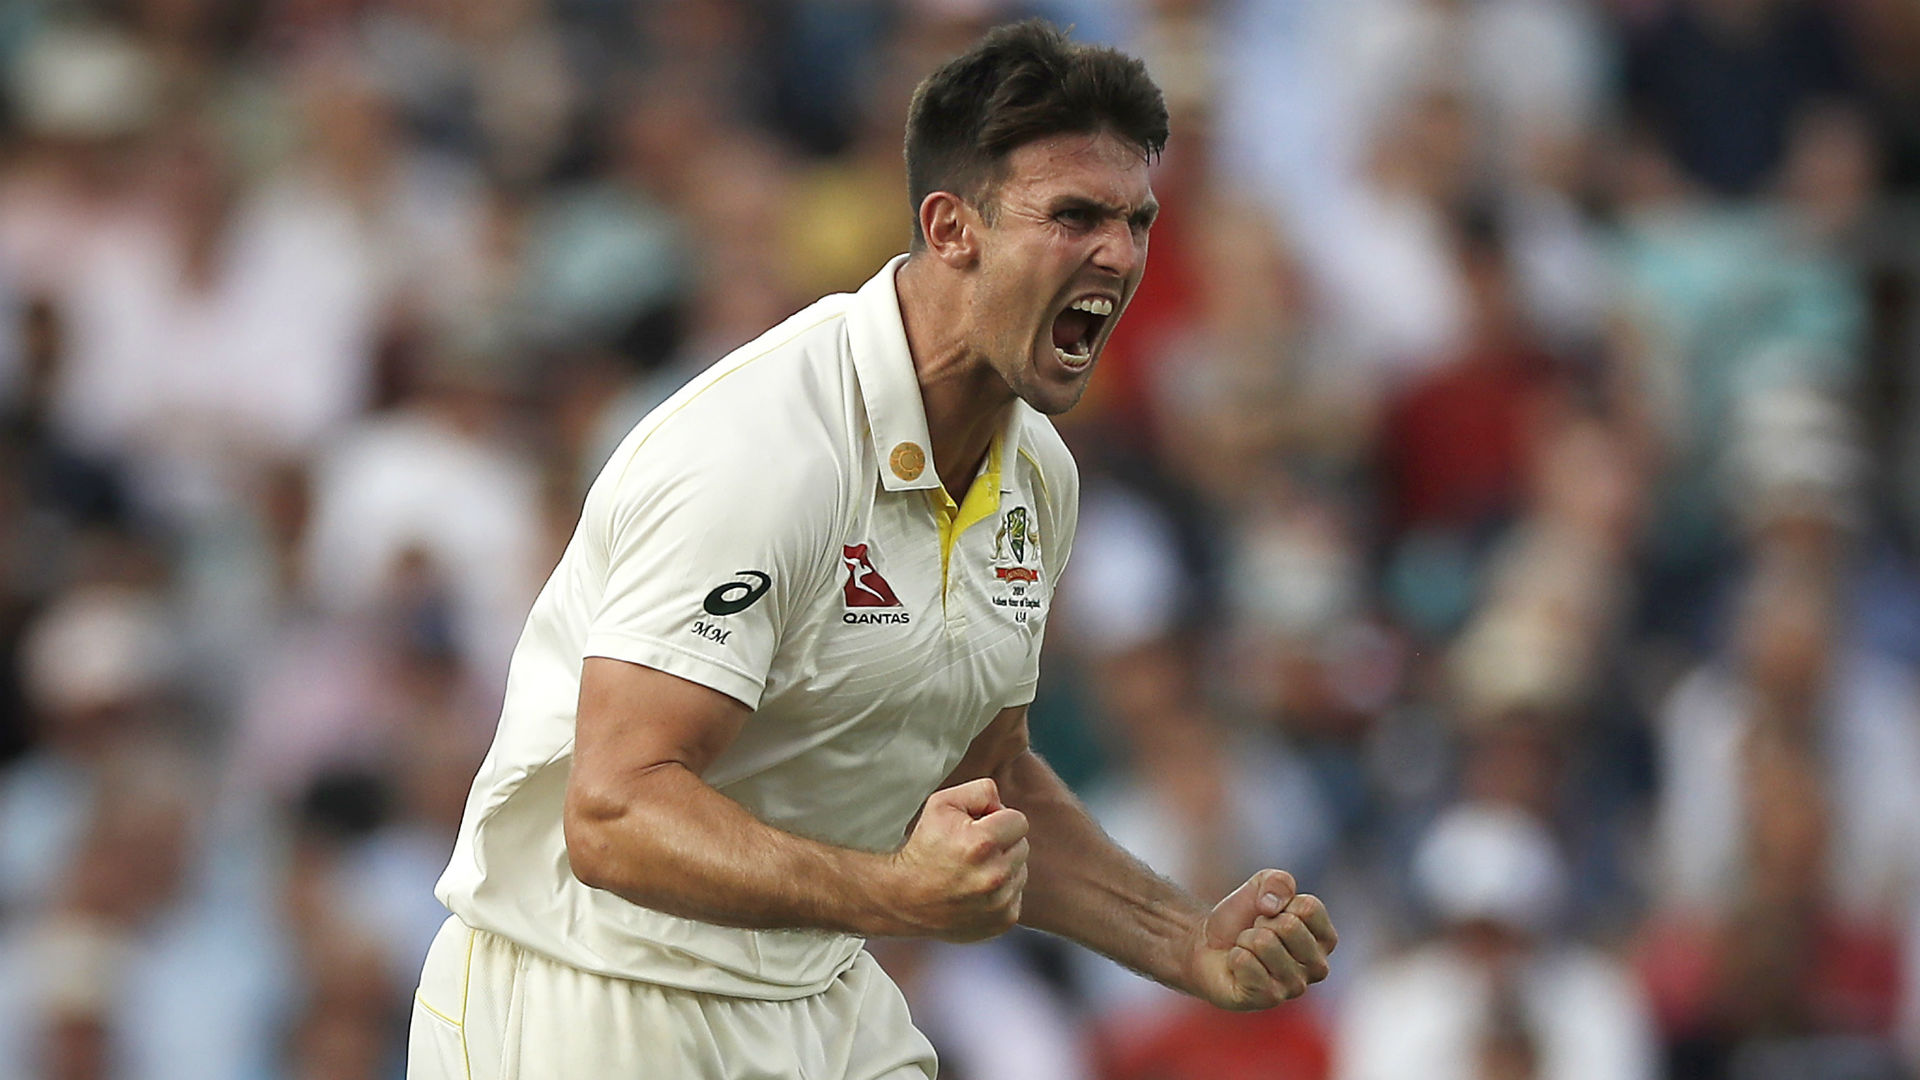 All-rounder Mitchell Marsh was delighted to make an impact on day one of his first Ashes appearance of the series at The Oval.